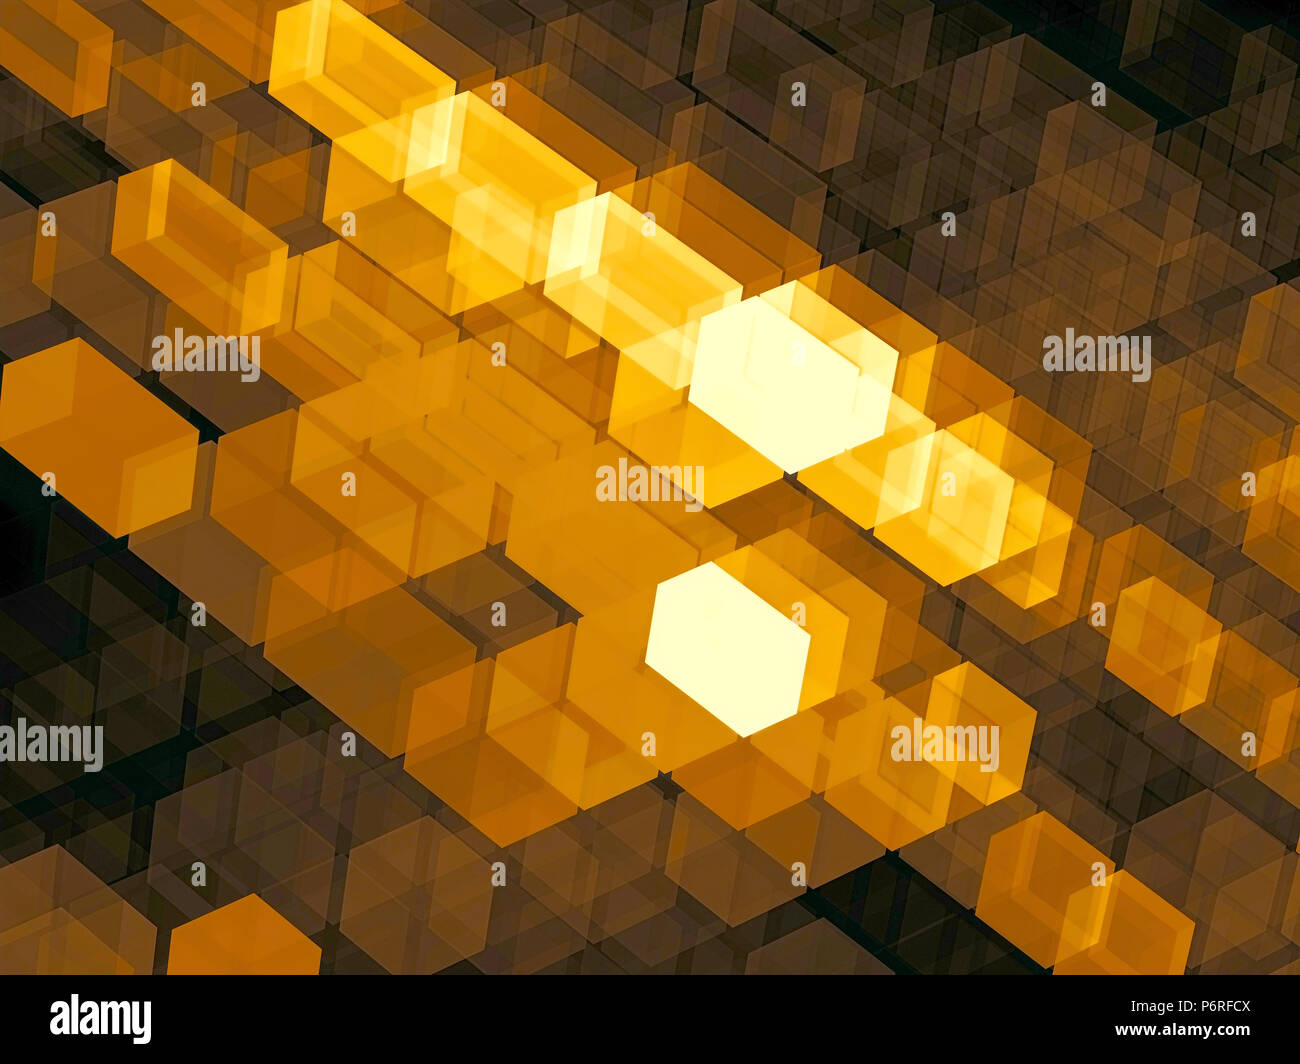 Golden cubes - abstract digitally generated image Stock Photo